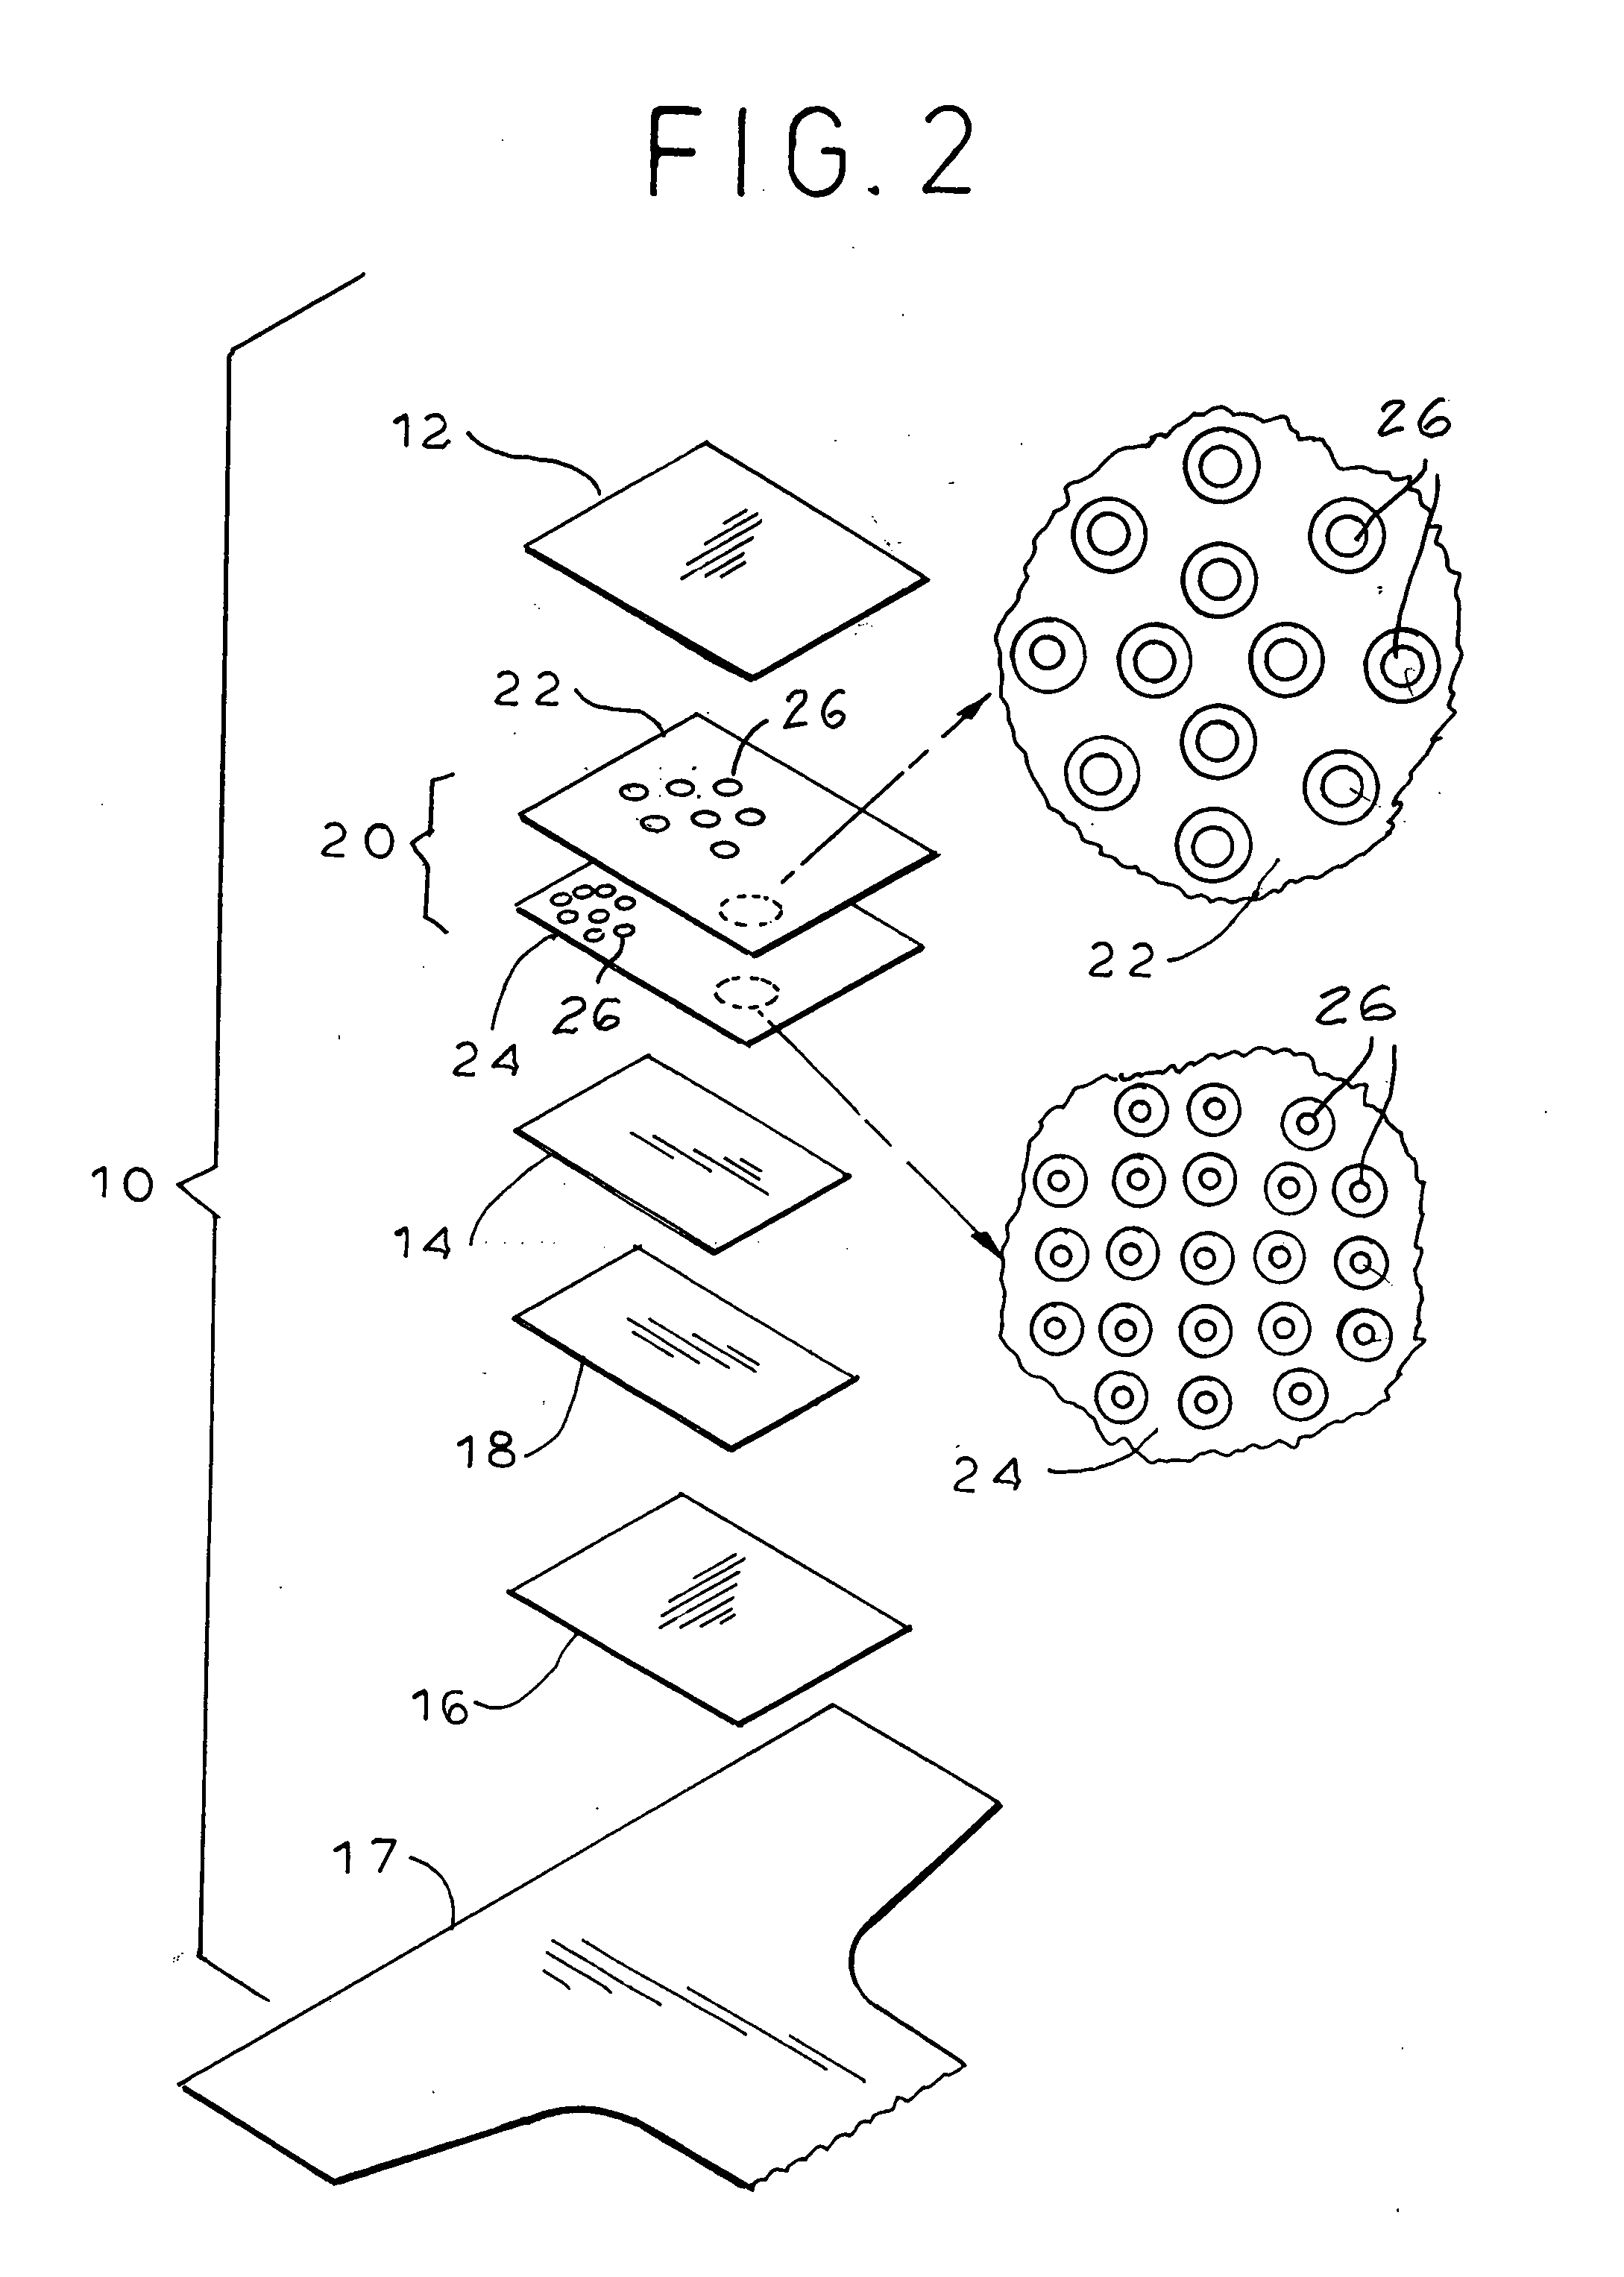 Absorbent article with layered acquisition/distribution system